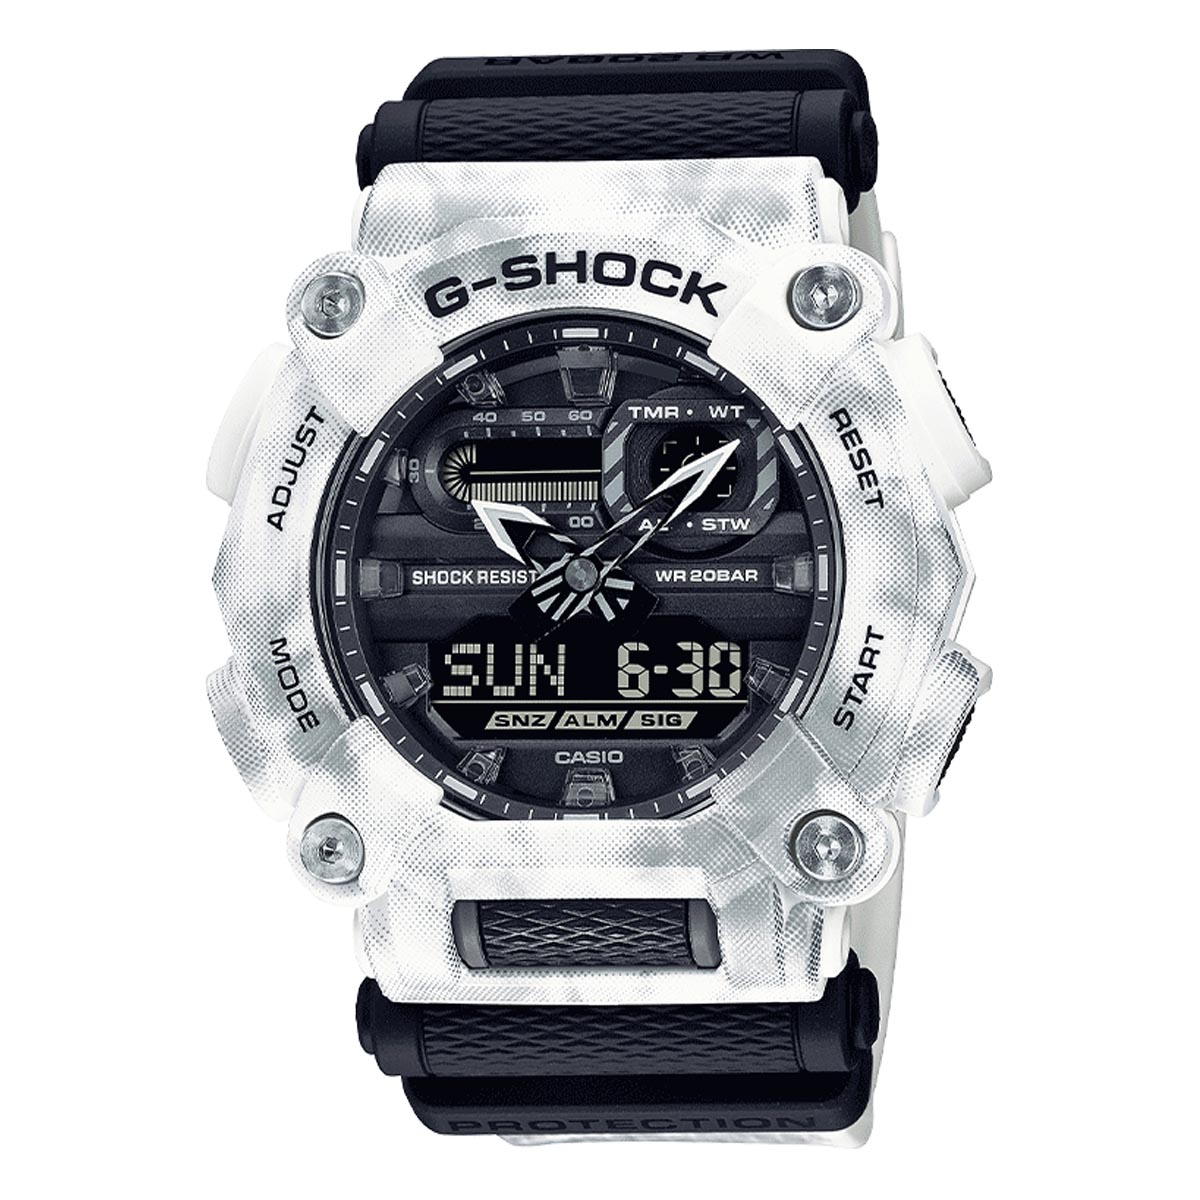 G Shock Mens Watch with Black Dial and White/Black Strap (quartz movement)